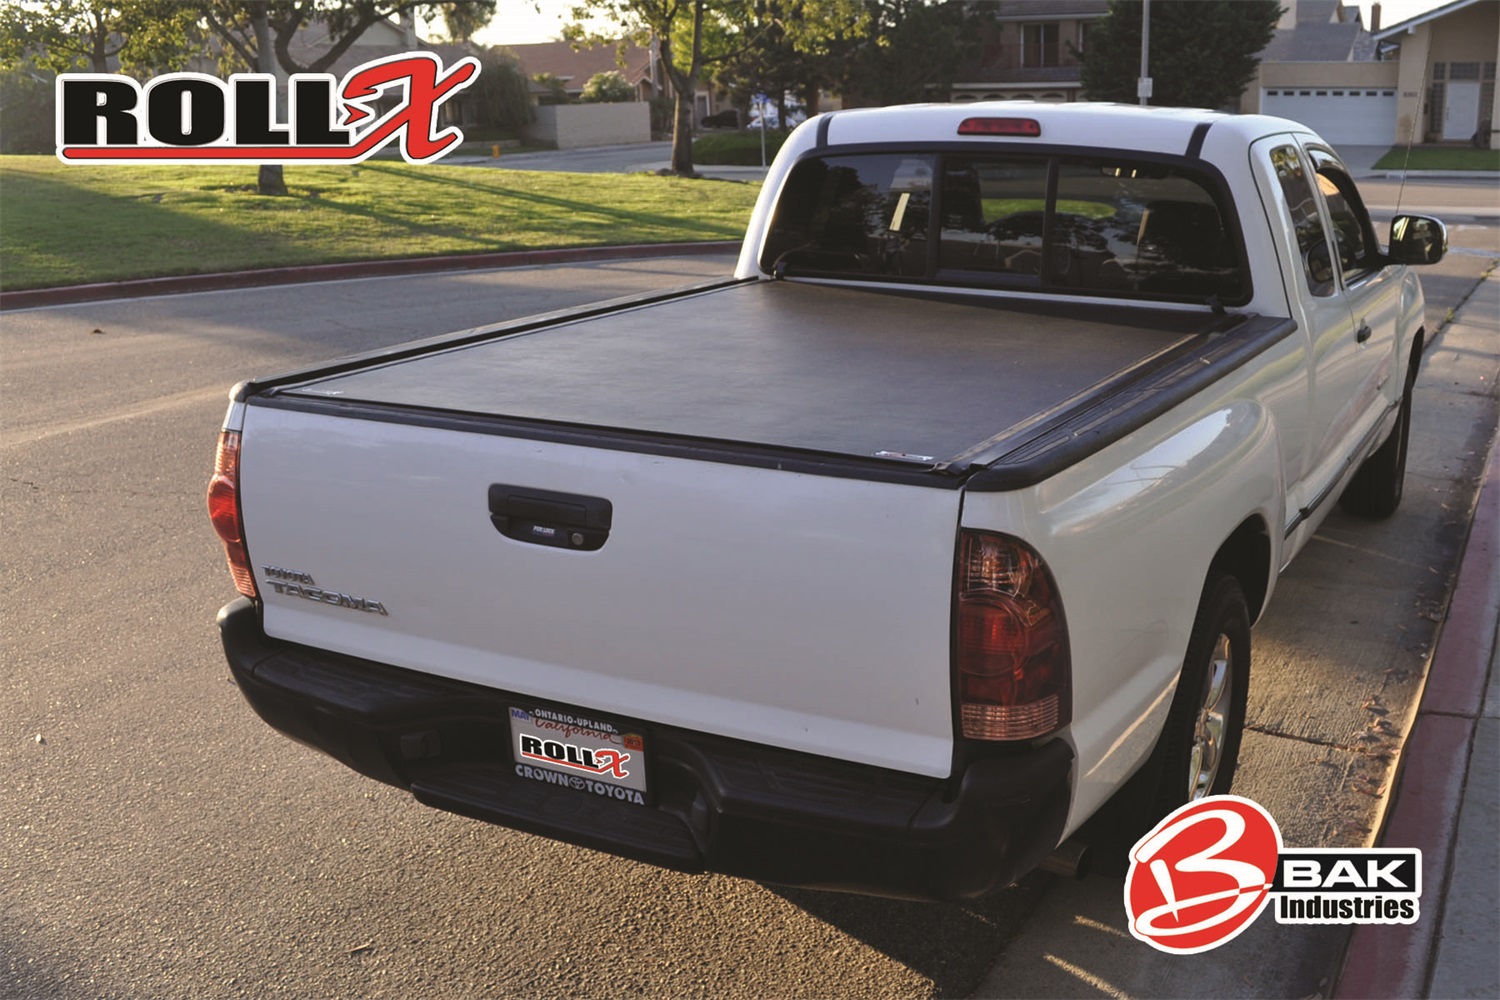 BAK Industries BAK Industries 36406 Truck Bed Cover Fits 05-15 Tacoma